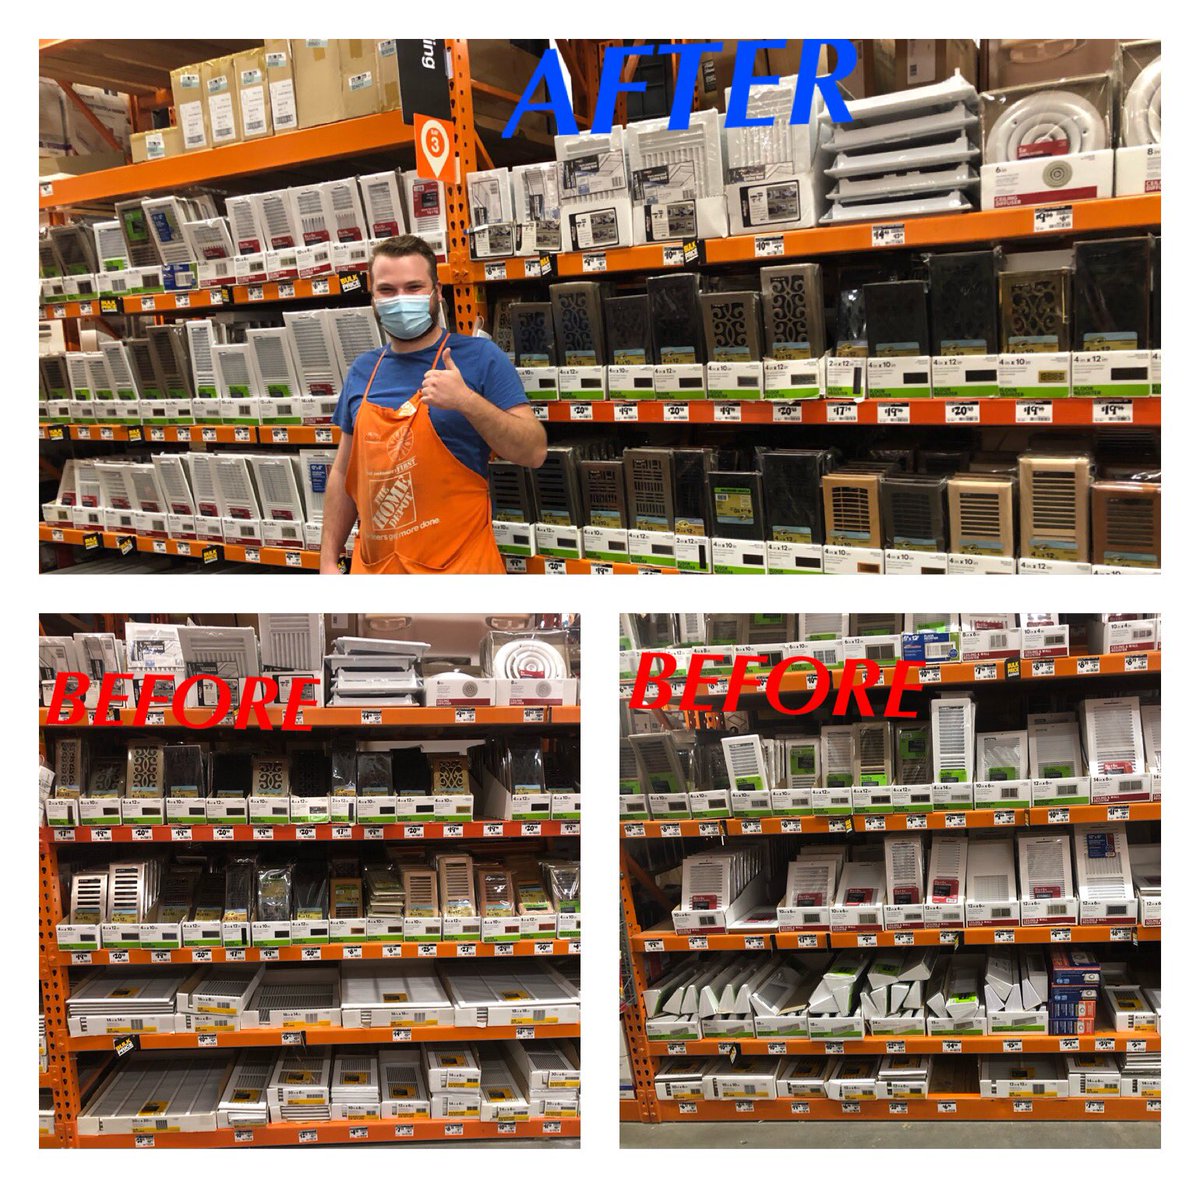 Huge shout out to Oliver for keeping his top 25 classes clean, packed out, overheads organized, and on hands correct! #aircirculation #perfectbay @hdGeri1969 @karch_mike @BrianLyonsHD